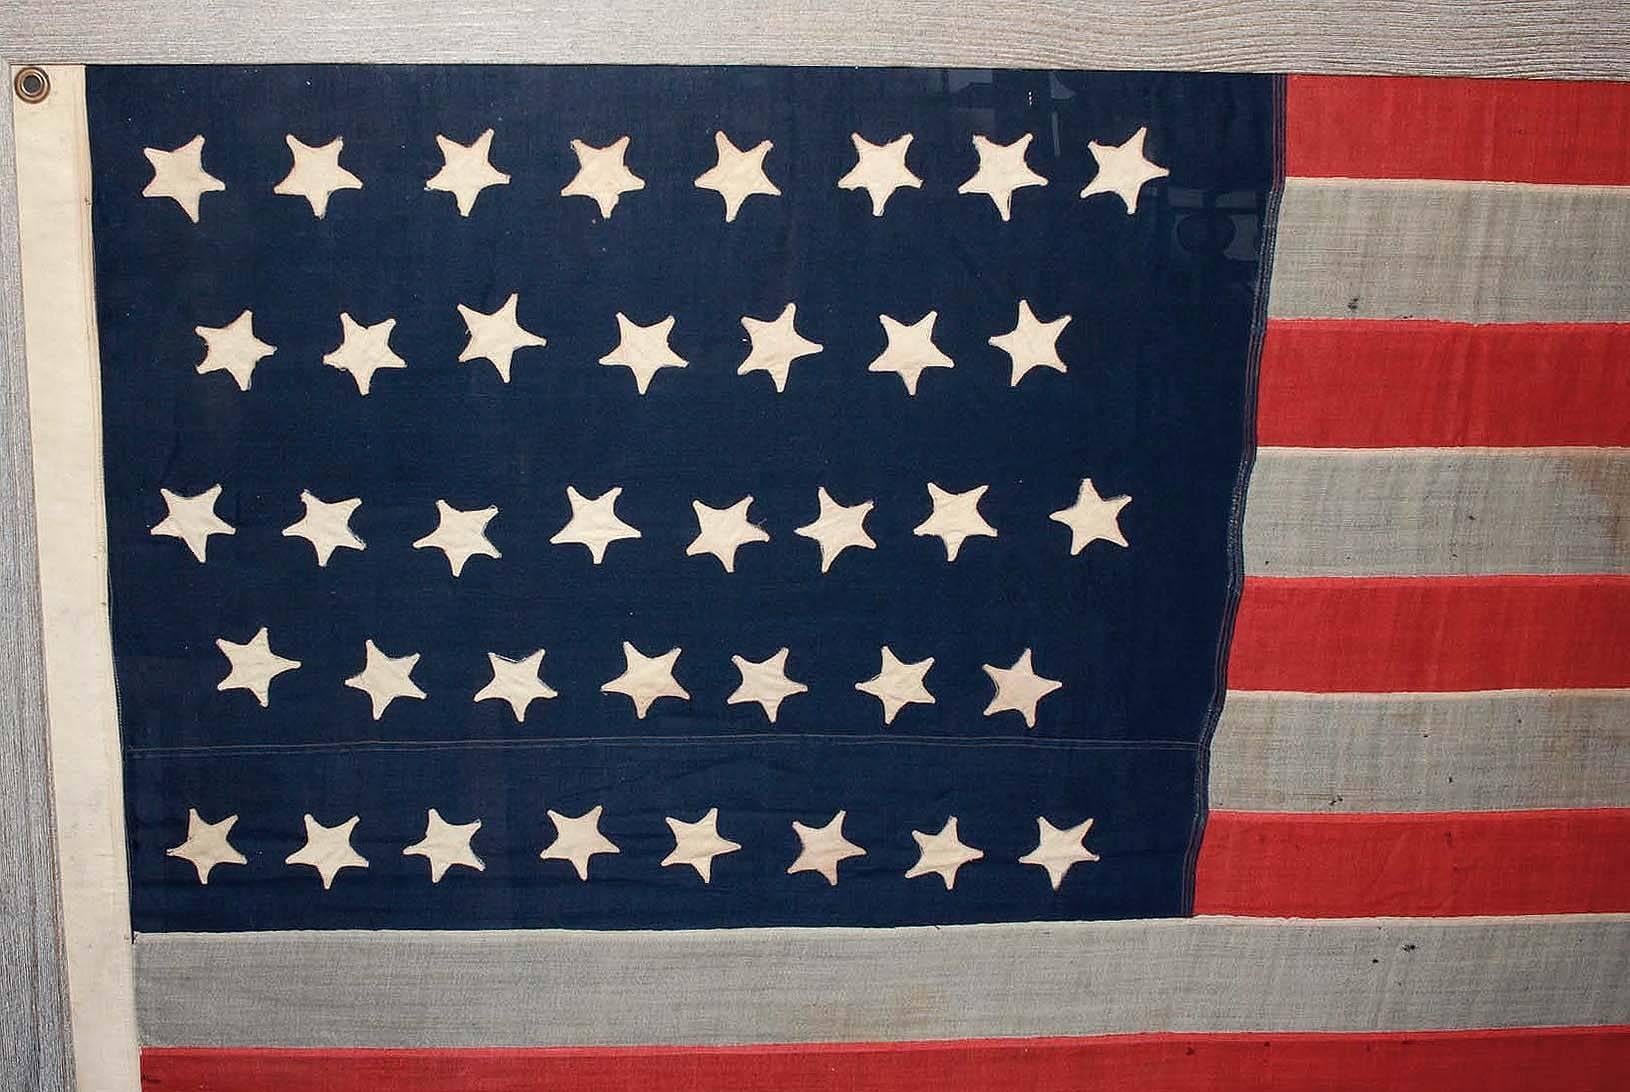 This flag became the Official United States flag on July 4th, 1877. A star was added for the admission of Colorado (August 1st 1876) and was to last for 13 years. Handmade of linen, the stars are all hand-cut and sewn onto the linen. This flag is a